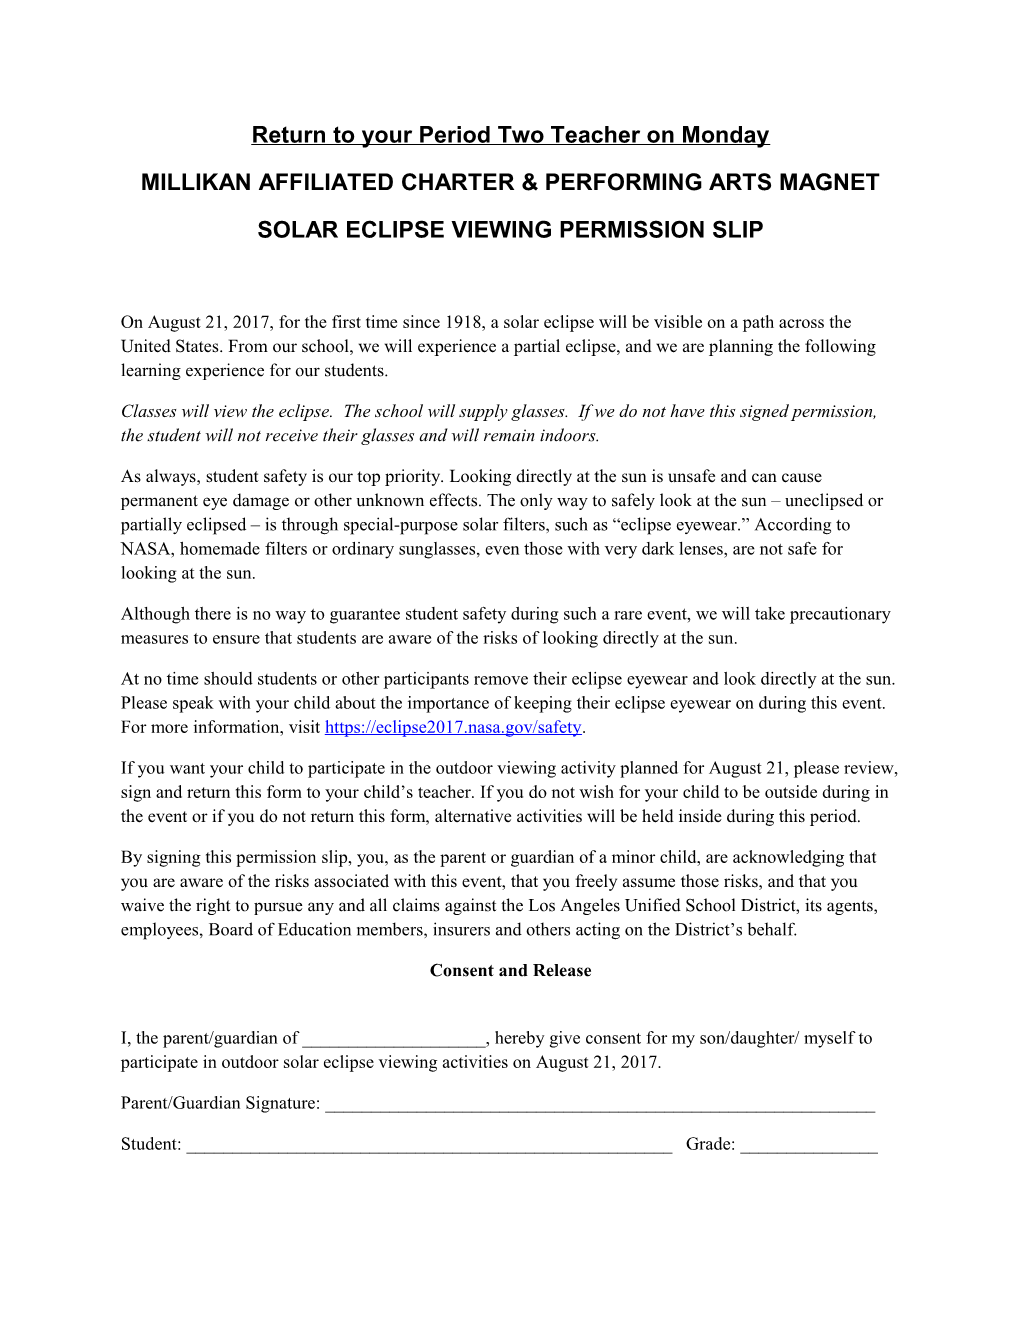 Millikan Affiliated Charter & Performing Arts Magnet